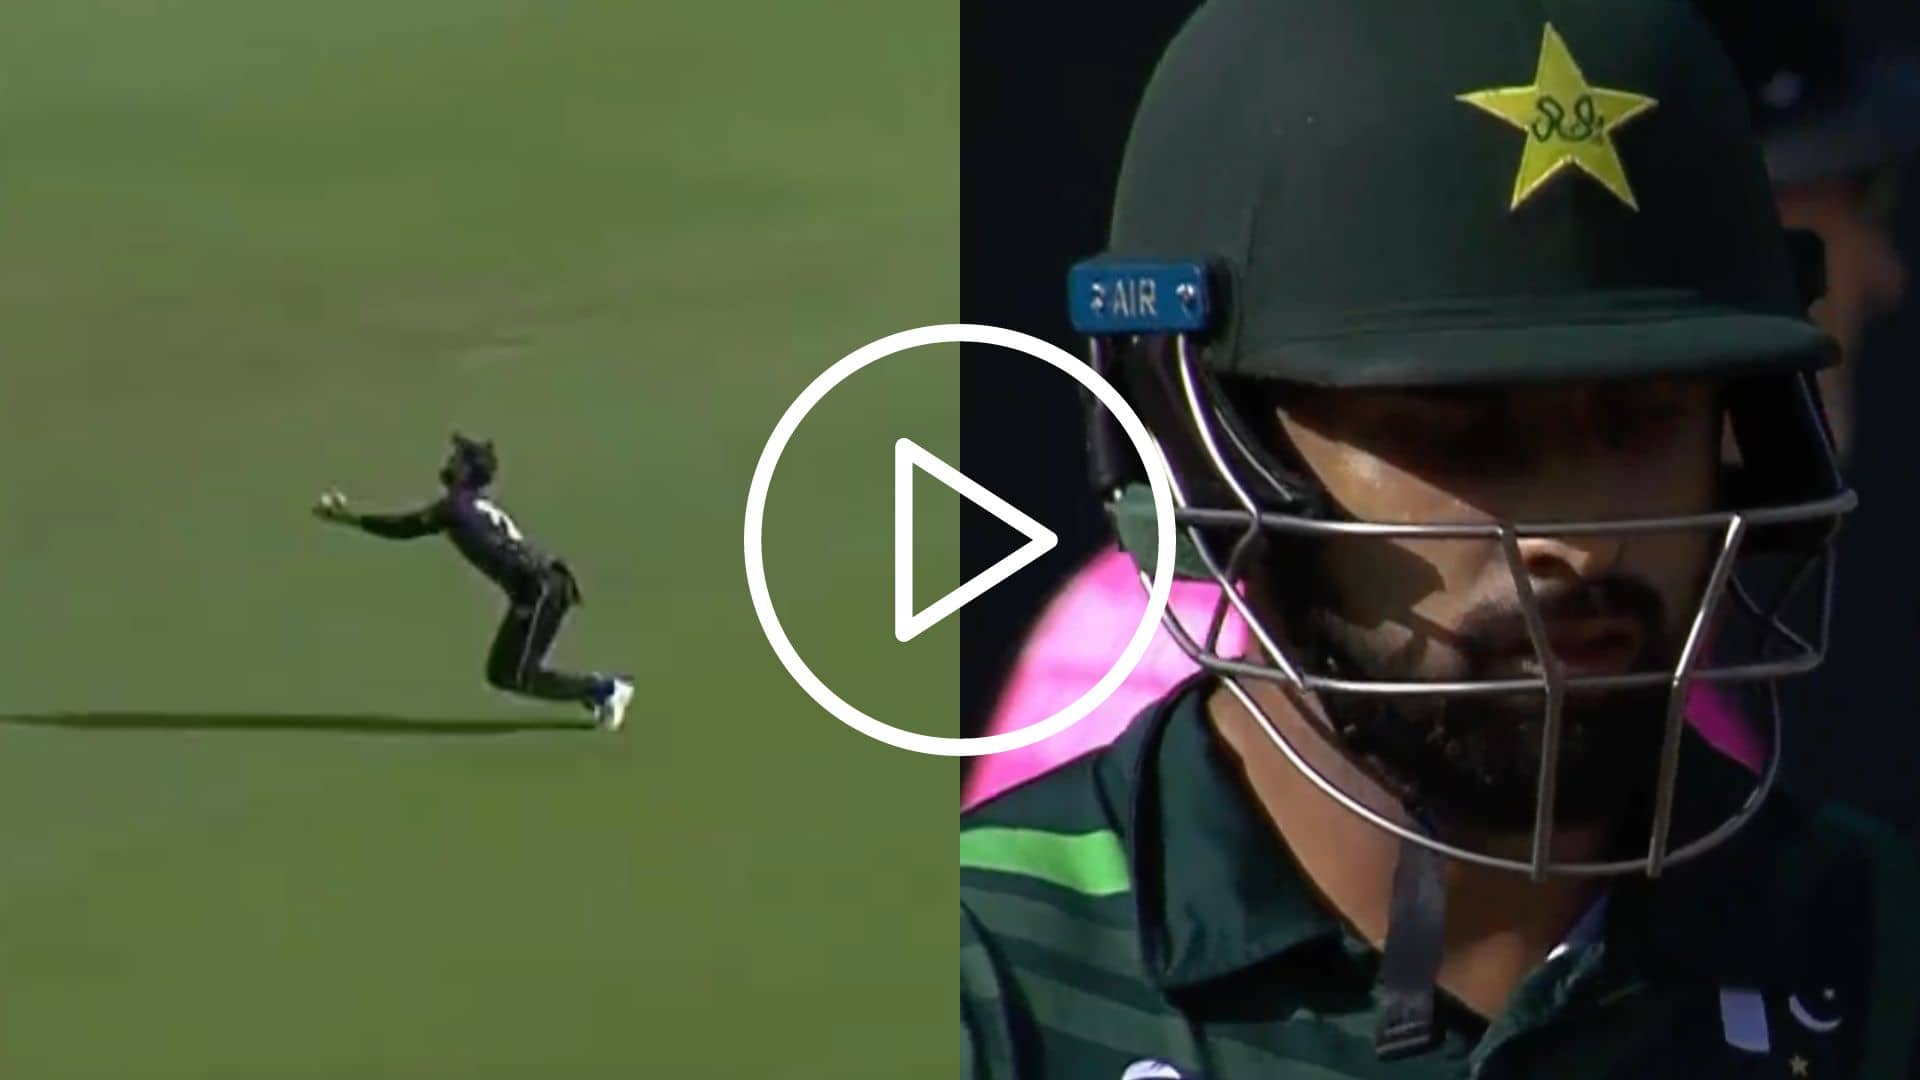 [Watch] Kane Williamson's Flying Catch Sends Abdullah Shafique Packing